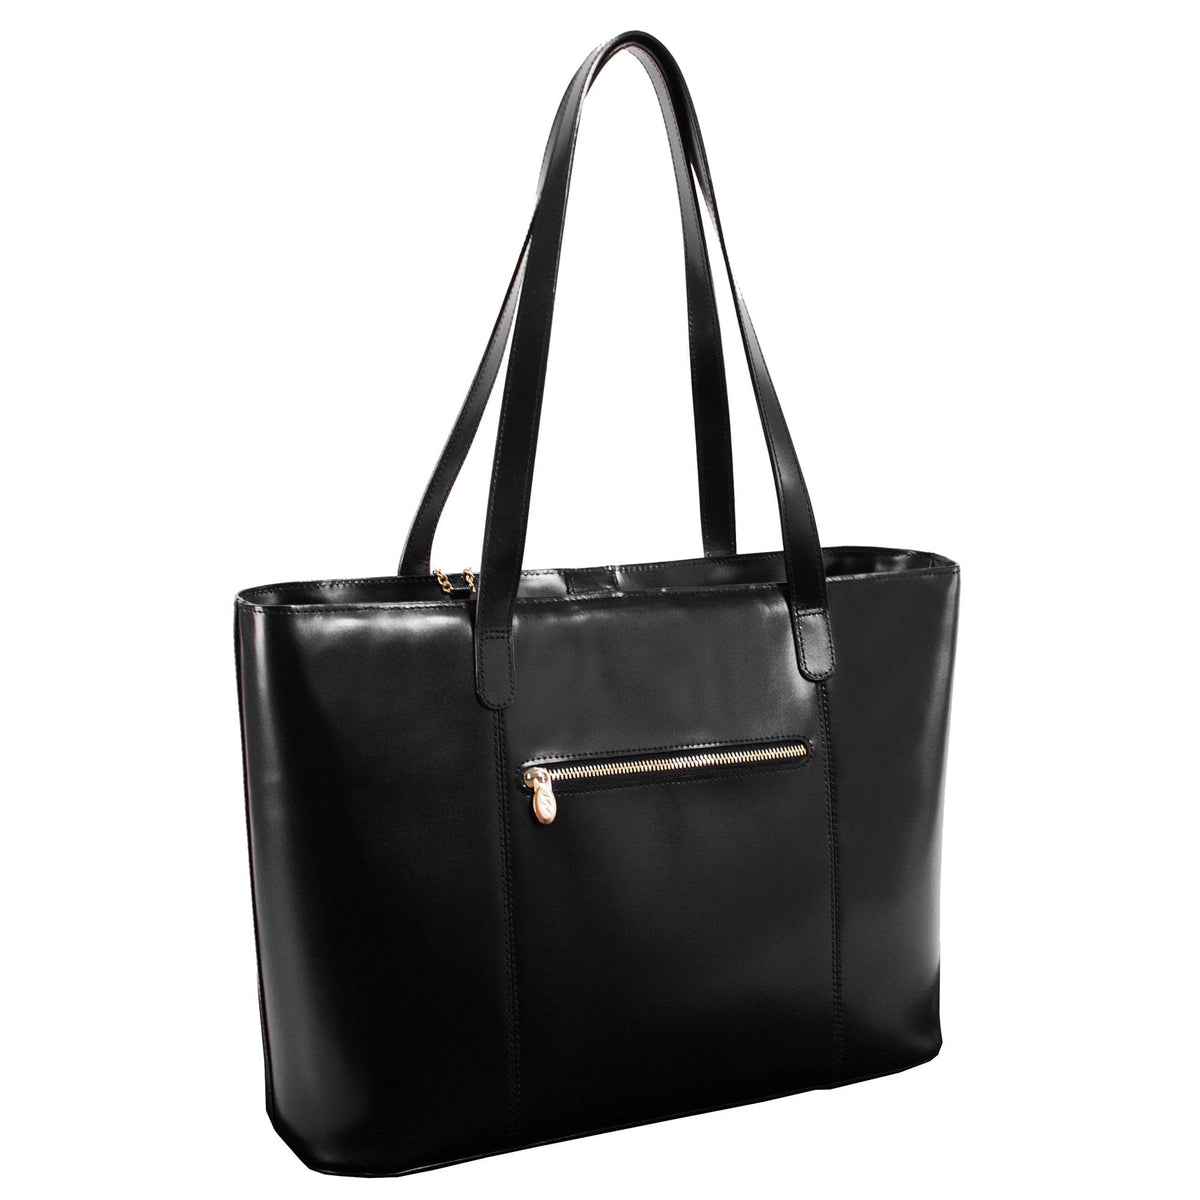 McKlein USA Alyson Leather Tote Bag with Tablet Pocket